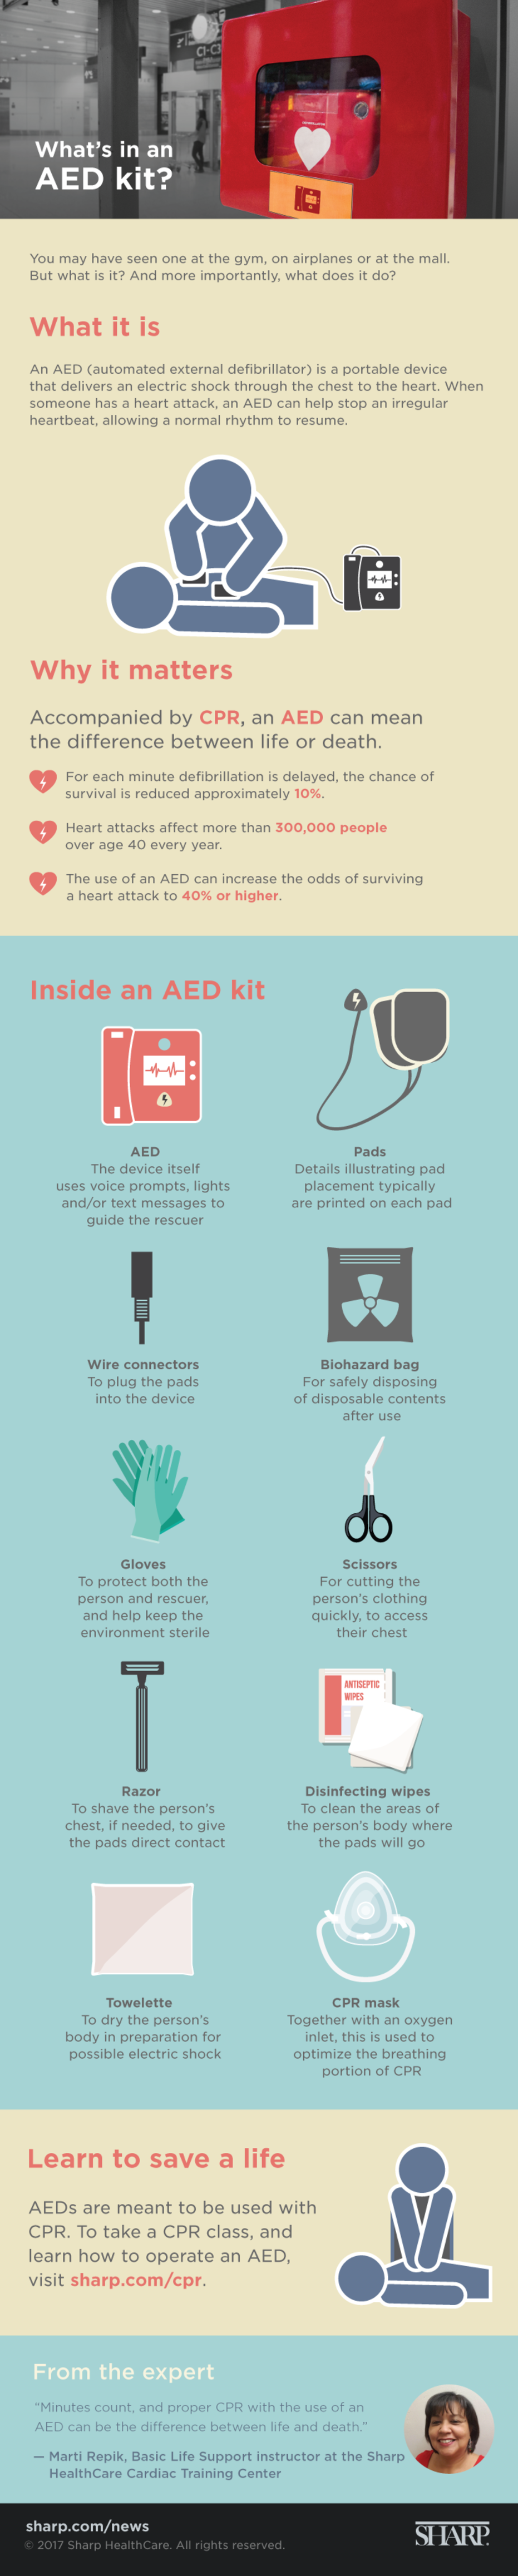 What's in an AED kit? (infographic)